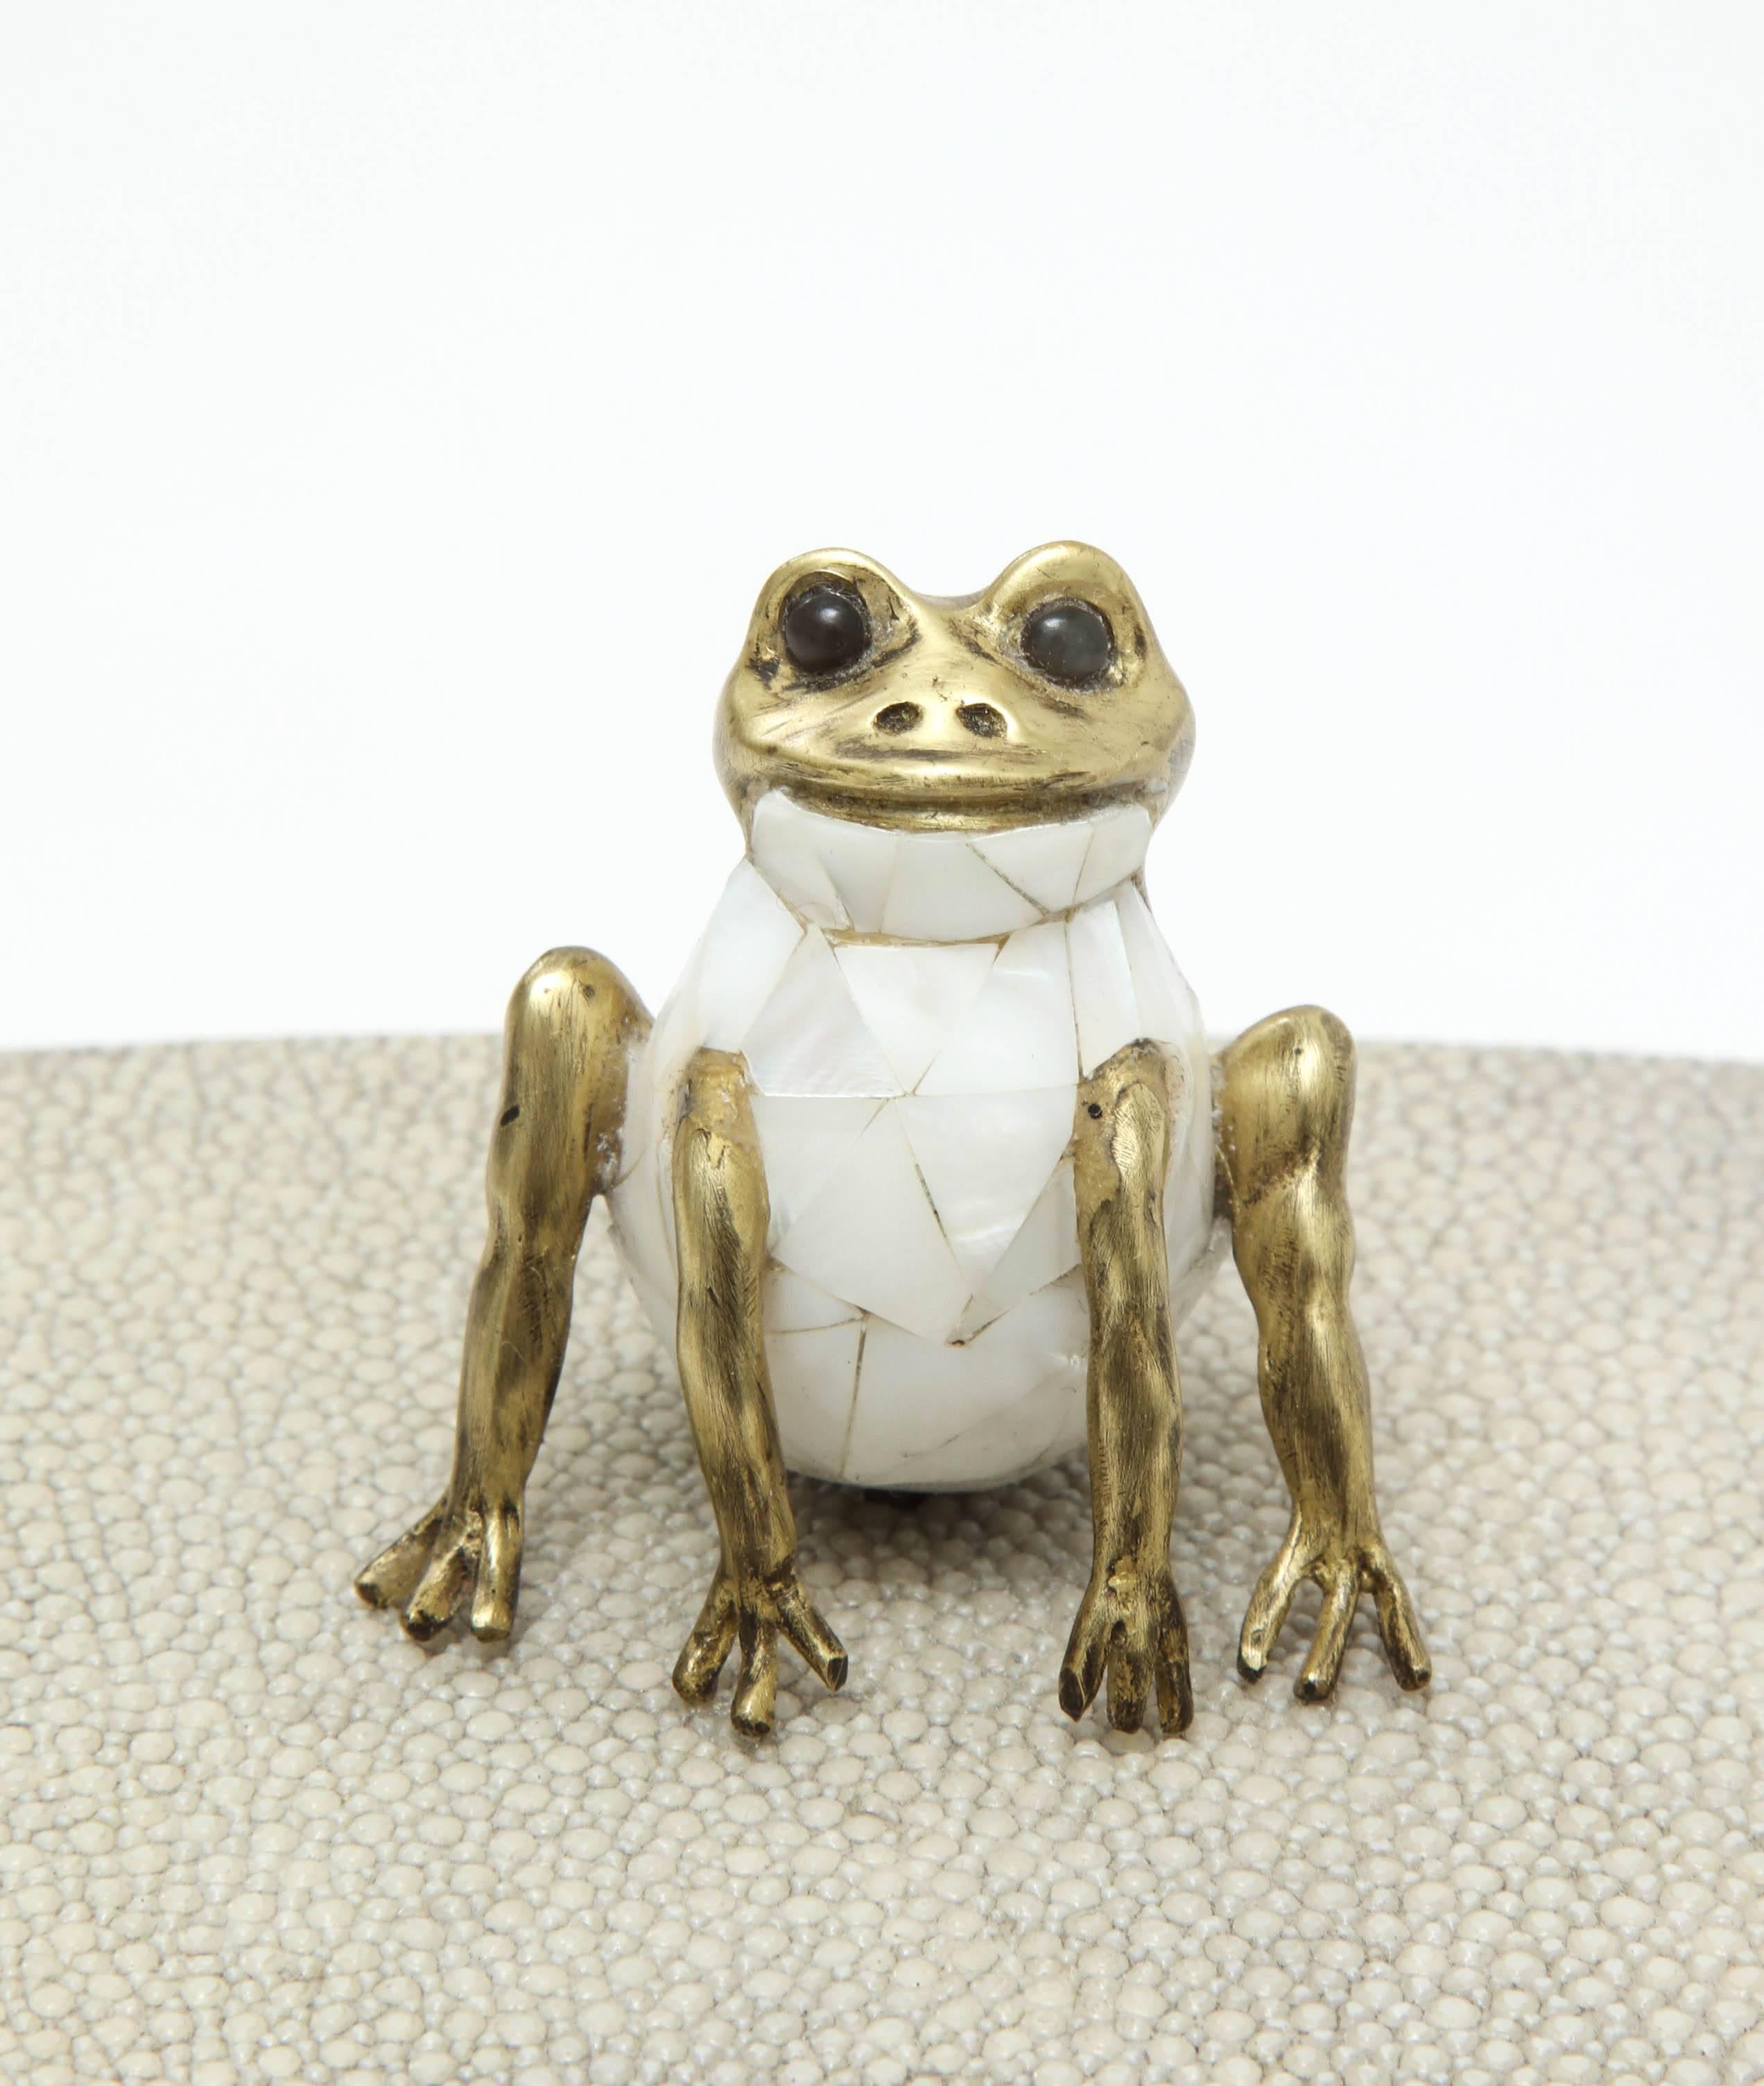 Bronze Shagreen Box with Decorative Frog 